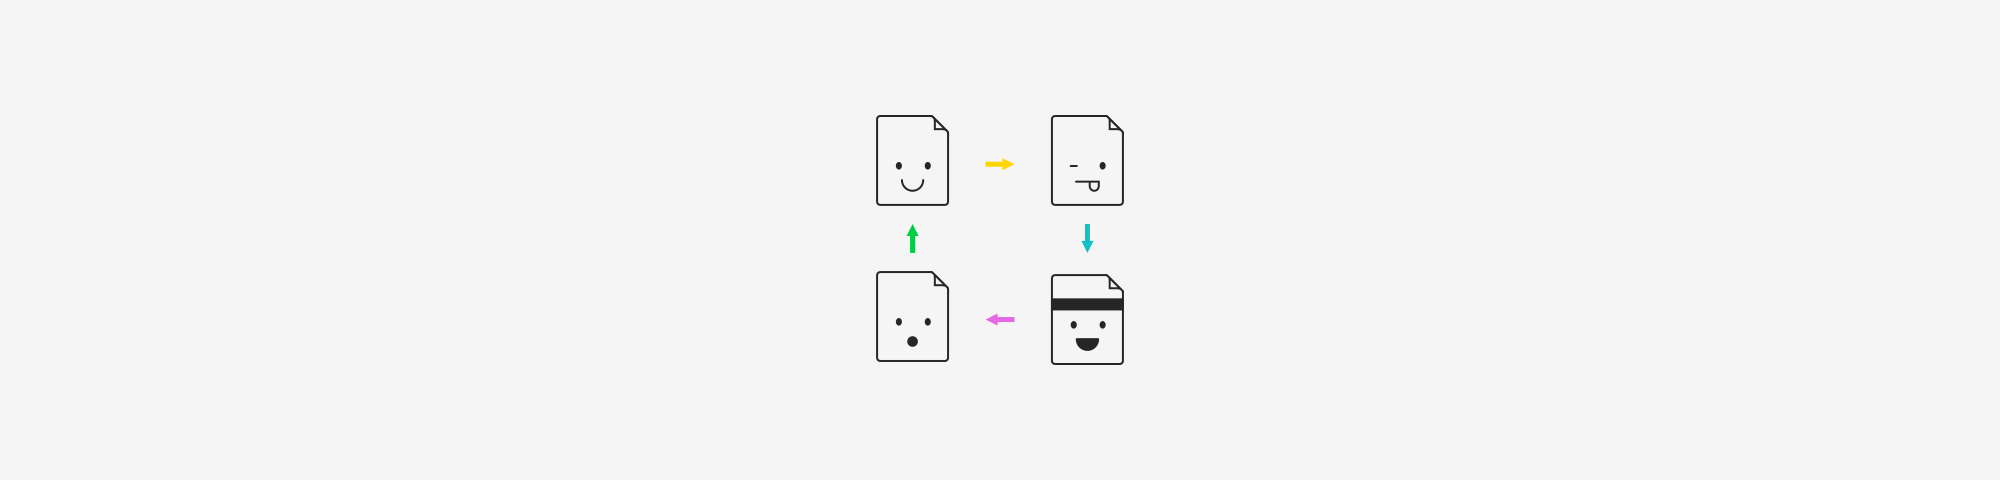 Connected workflows.png